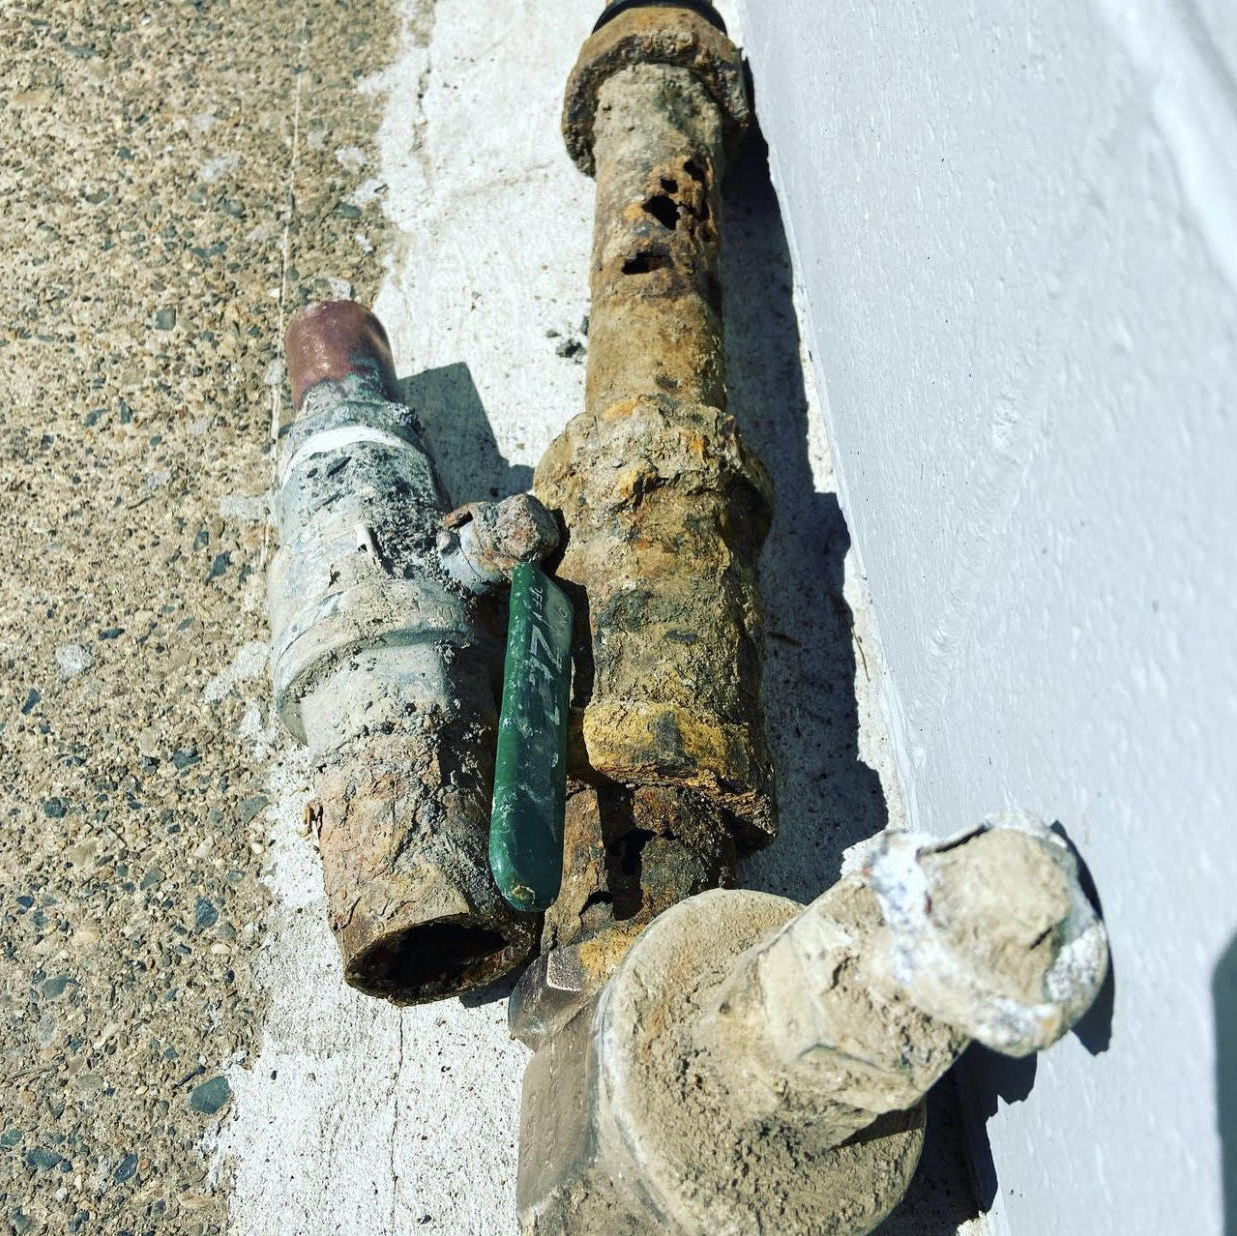 corroded old water main leaking water which need to be replaced by Jetty plumbing